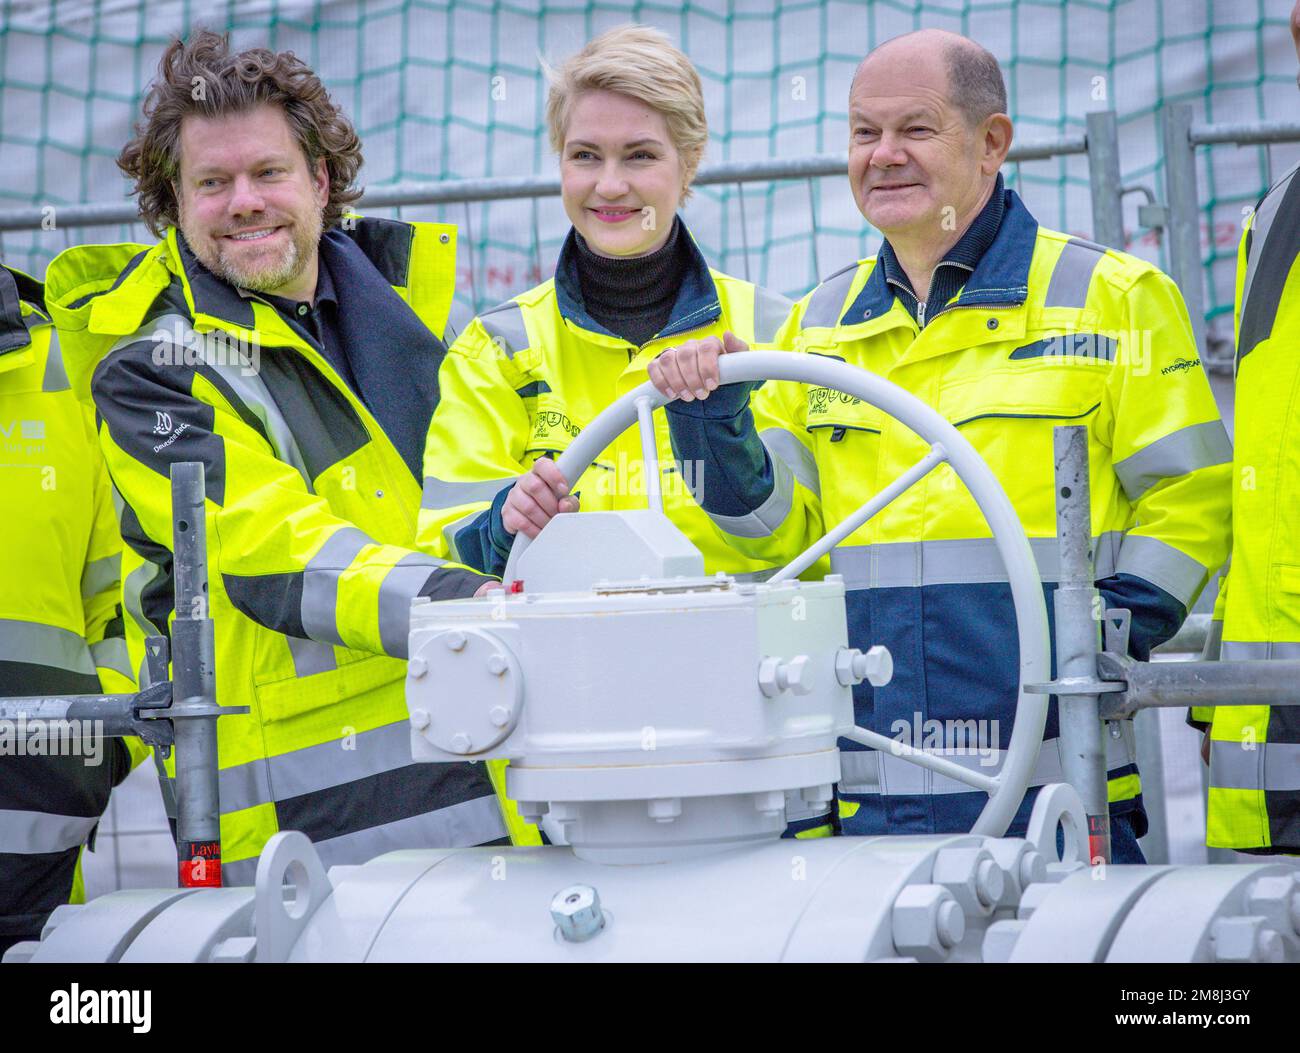 14 January 2023, Mecklenburg-Western Pomerania, Lubmin: German Chancellor Olaf Scholz (SPD, r), Ingo Wagner (l), Managing Director of Deutsche ReGas, and Manuela Schwesig (SPD), the Minister President of Mecklenburg-Western Pomerania, turn a barrier wheel at the LNG terminal with the processing ship 'Neptune', symbolically opening the facility. The terminal for the delivery of liquefied natural gas (LNG), located on the Baltic Sea, is officially commissioned and receives the last outstanding operating permit. Germany is relying on LNG delivered by ship, among other sources, to replace missing  Stock Photo